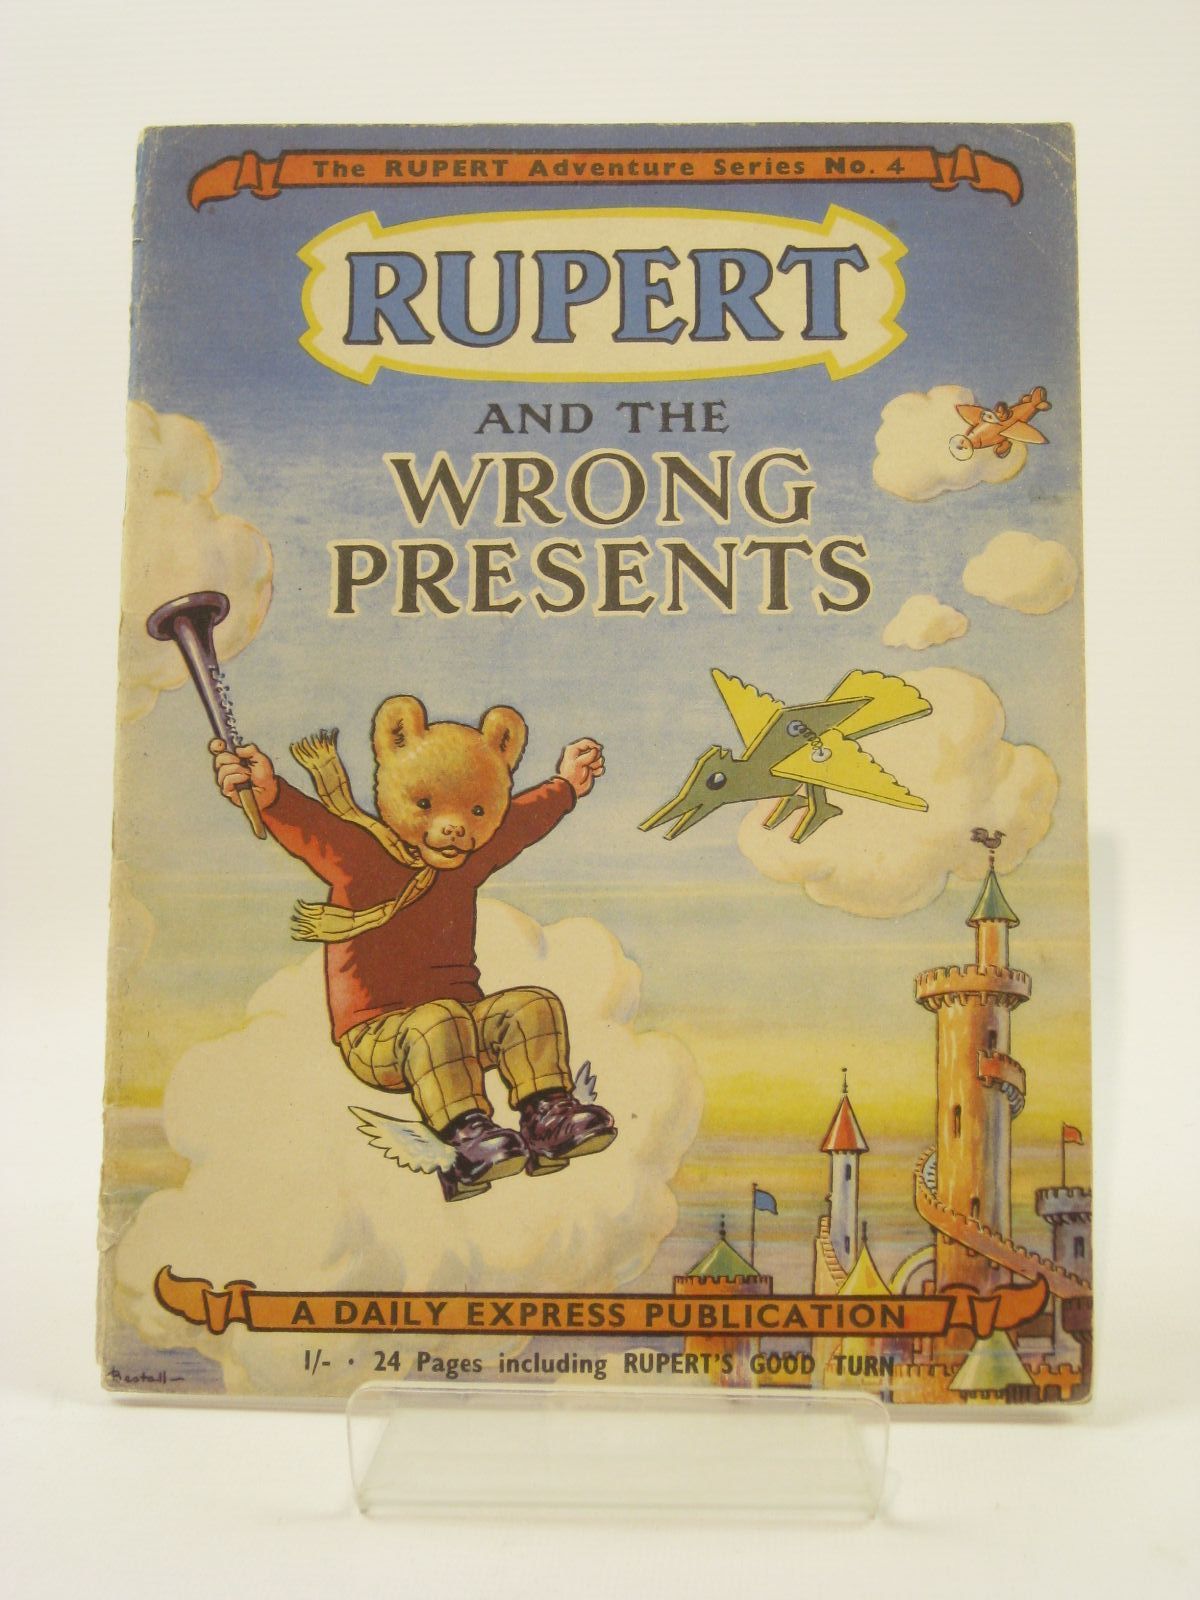 Photo of RUPERT ADVENTURE SERIES No. 4 - RUPERT AND THE WRONG PRESENTS written by Bestall, Alfred illustrated by Bestall, Alfred published by Daily Express (STOCK CODE: 1407195)  for sale by Stella & Rose's Books